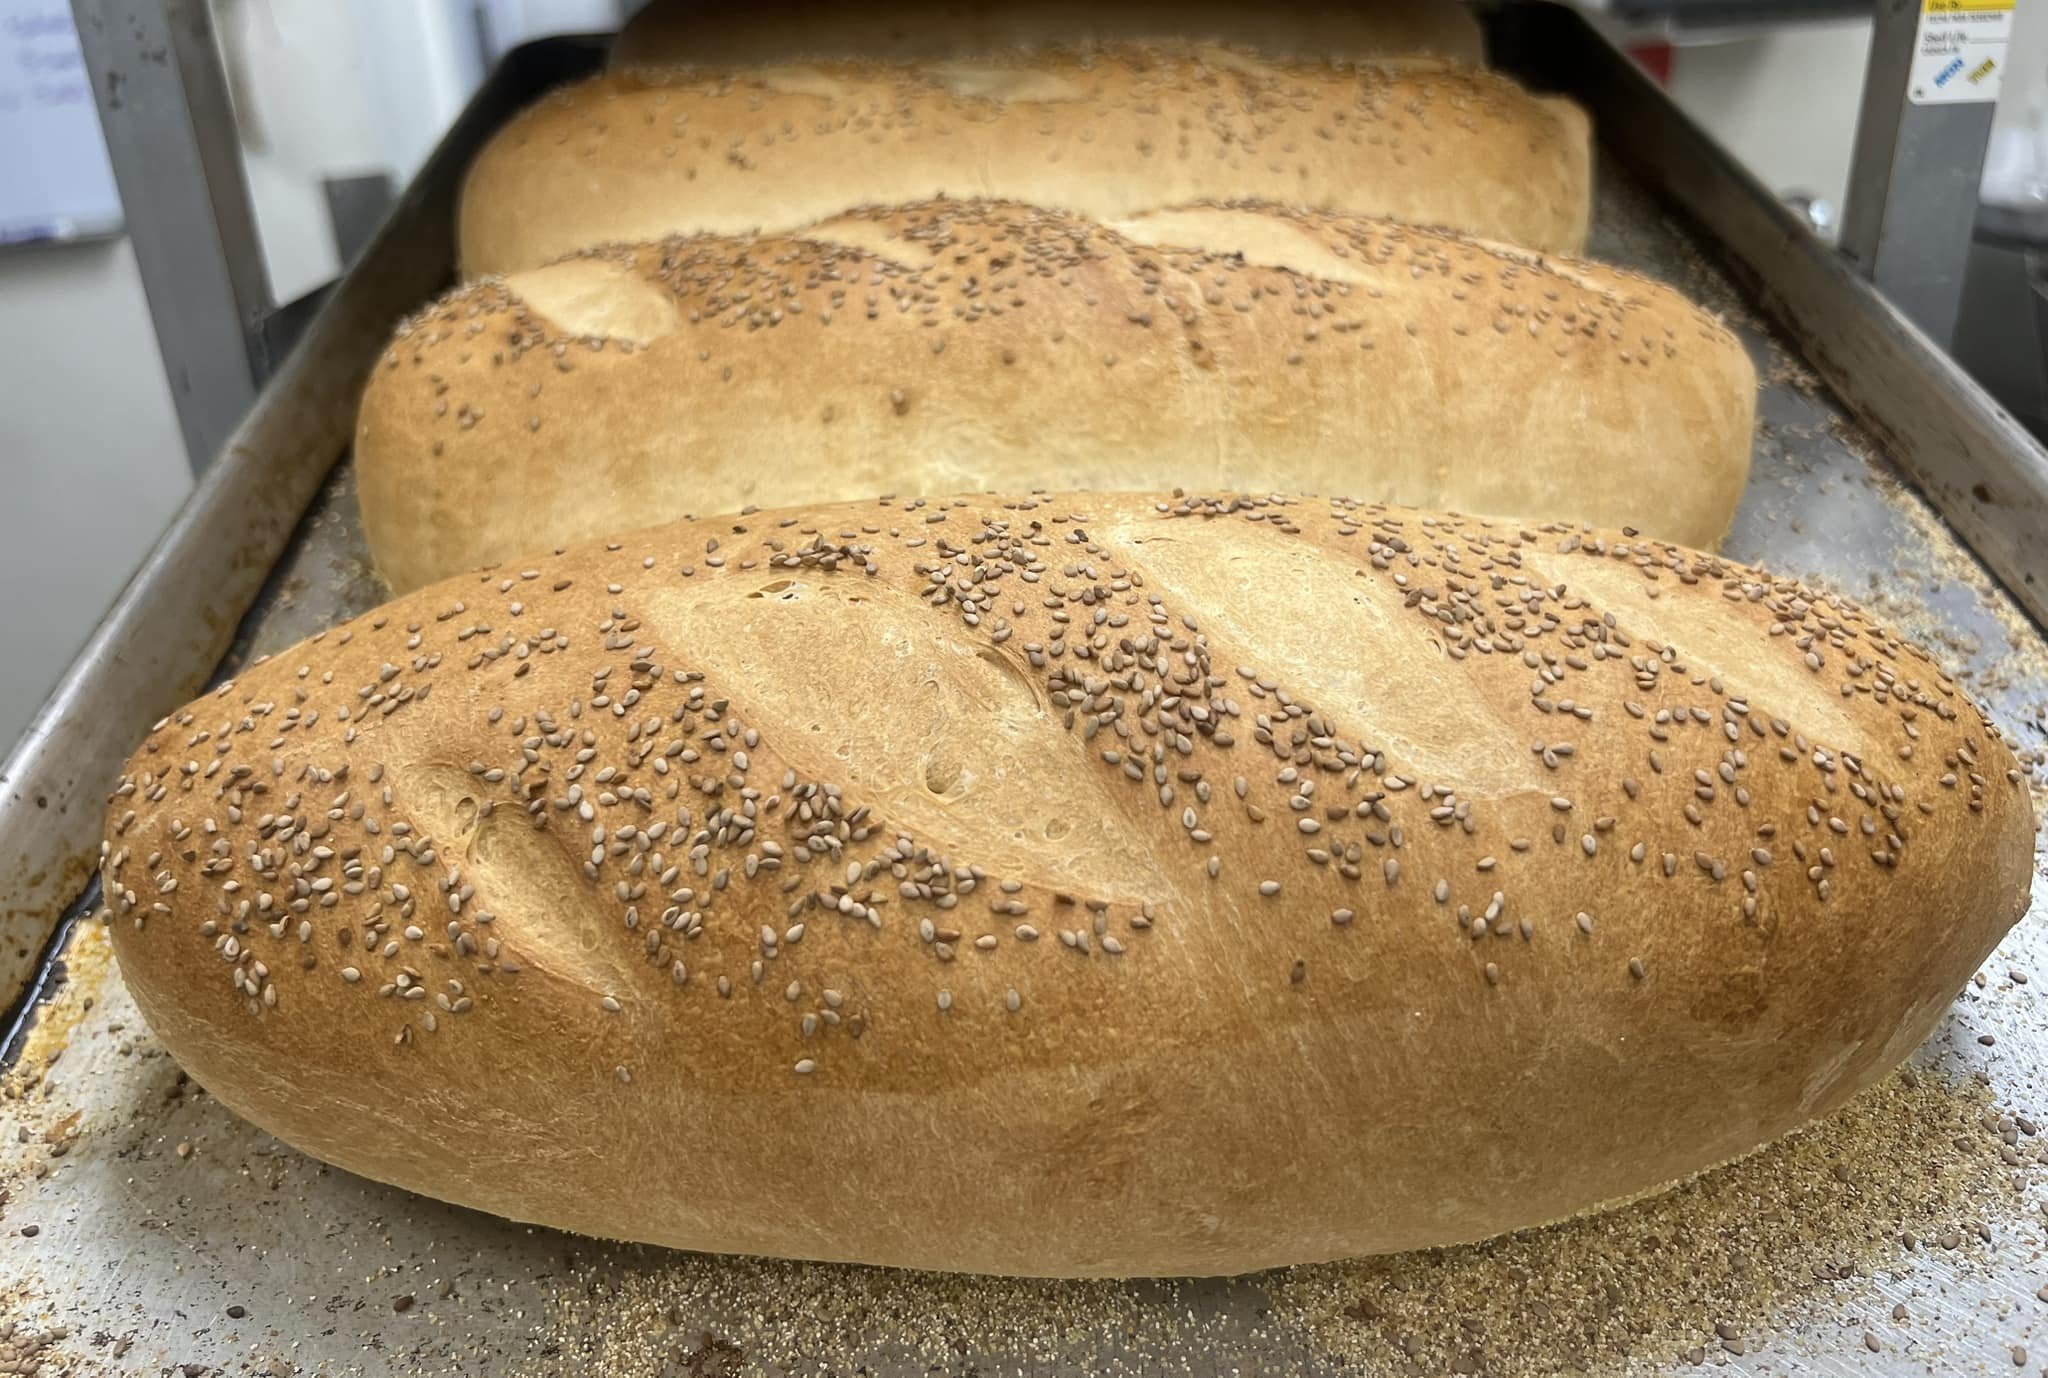 Stop in for a loaf of our freshly baked bread! 🥖